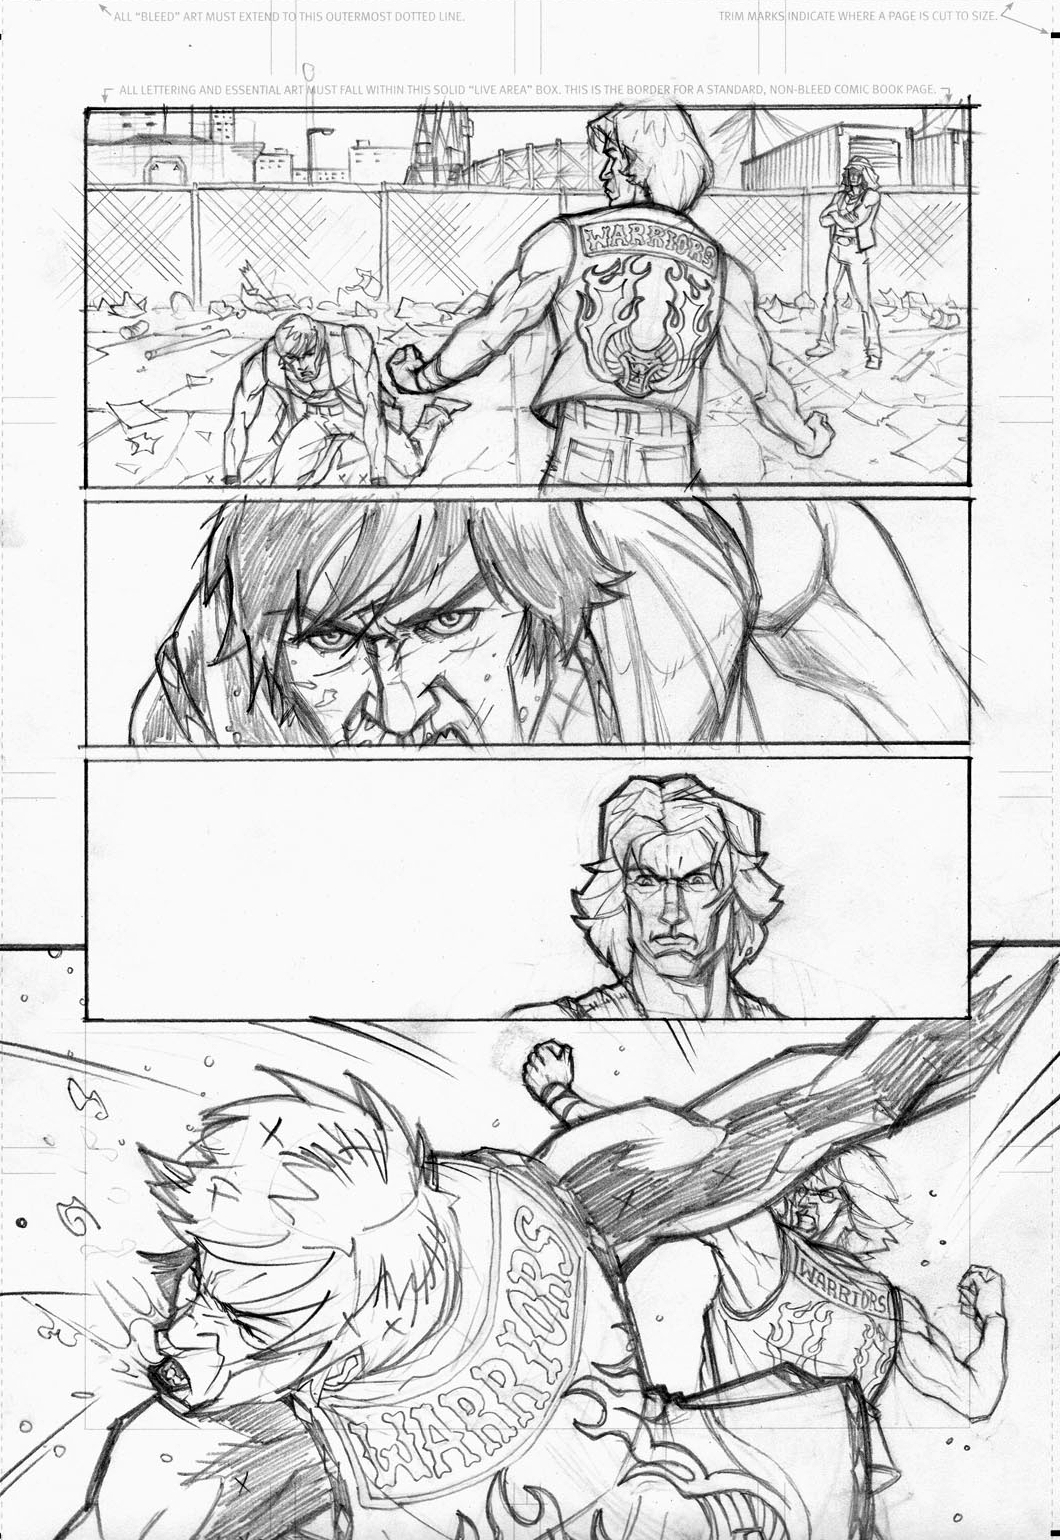 Herb Apon's pencils for page 2